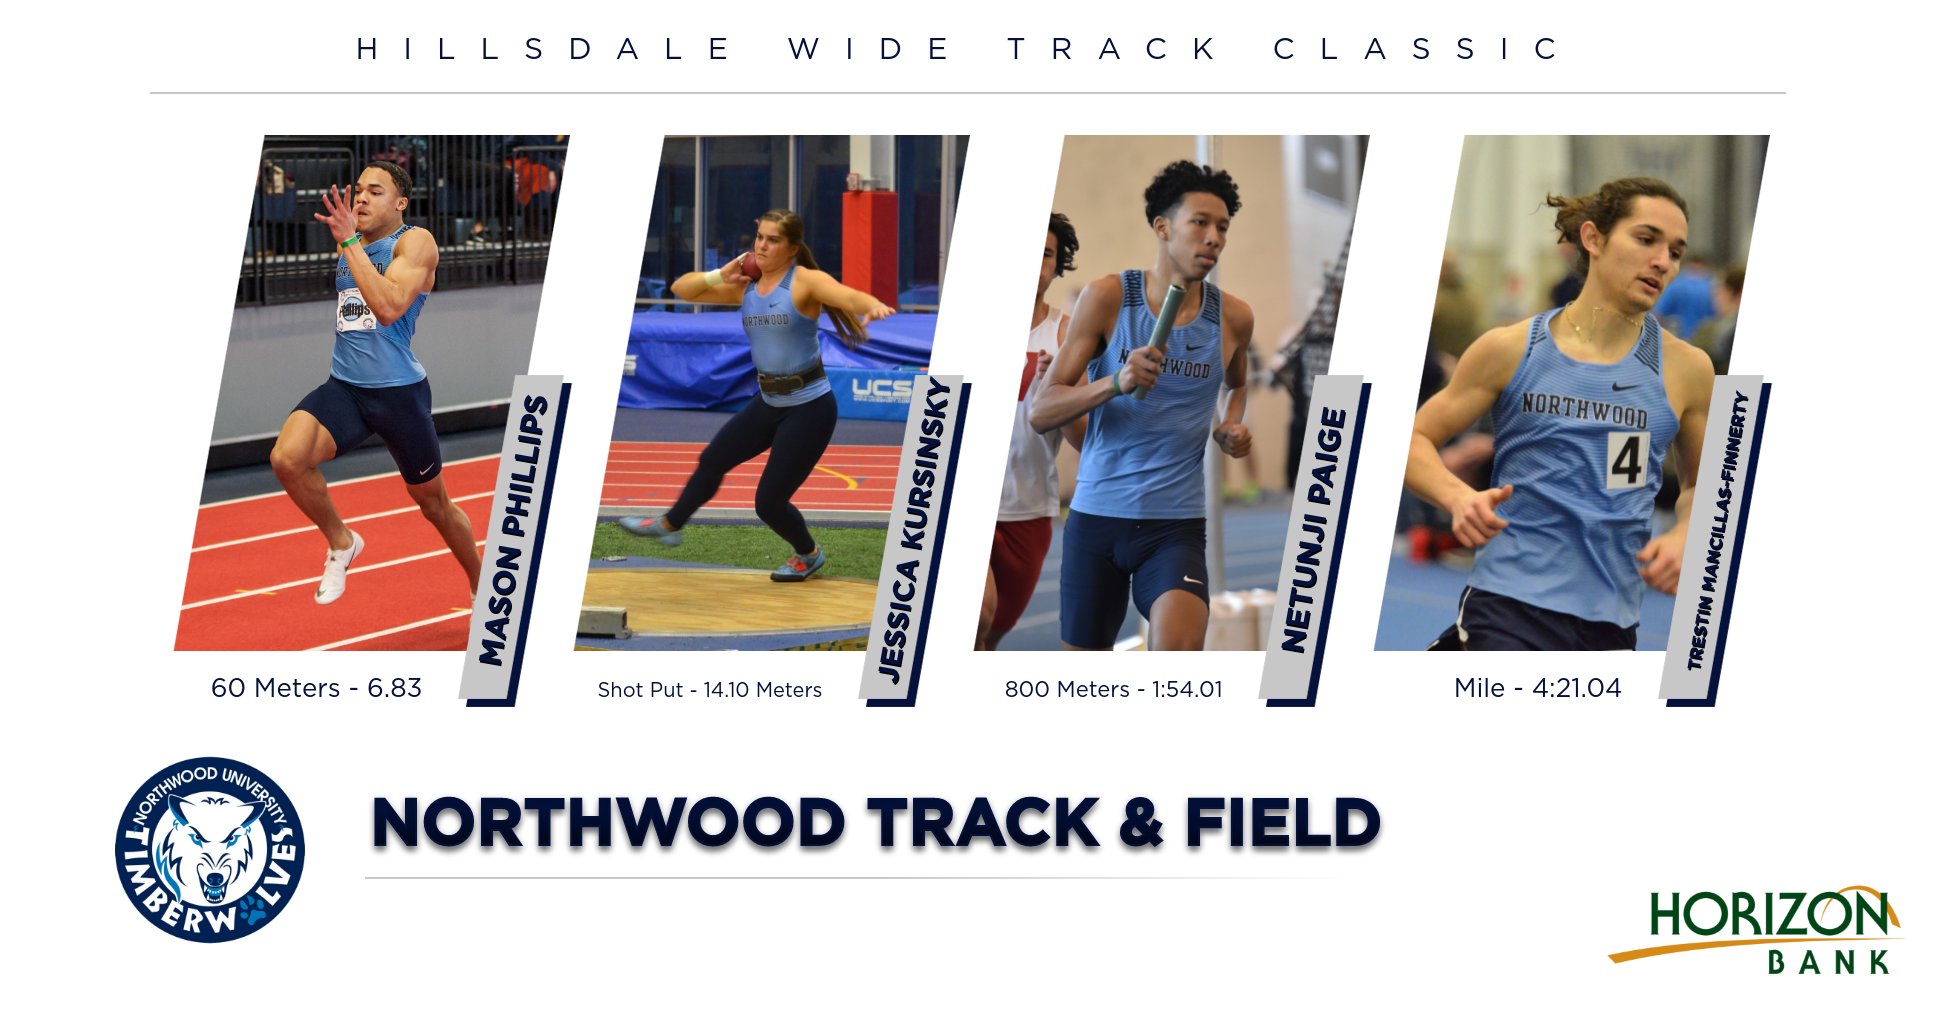 Wins, NCAA Marks Highlight Weekend For Track & Field Teams At Hillsdale